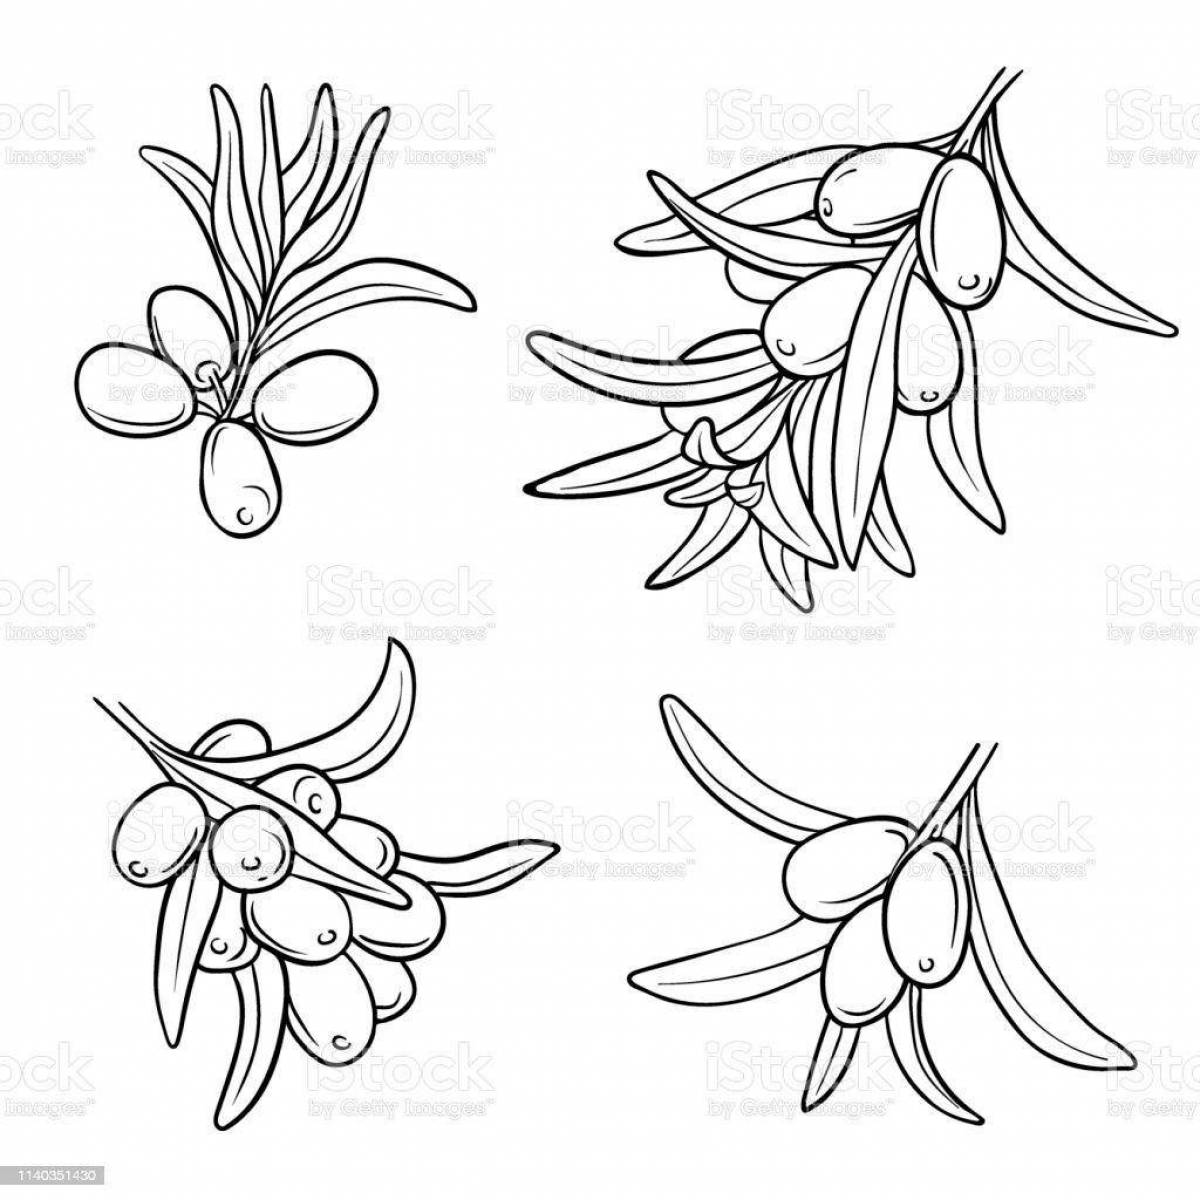 Attractive sea buckthorn coloring page for kids